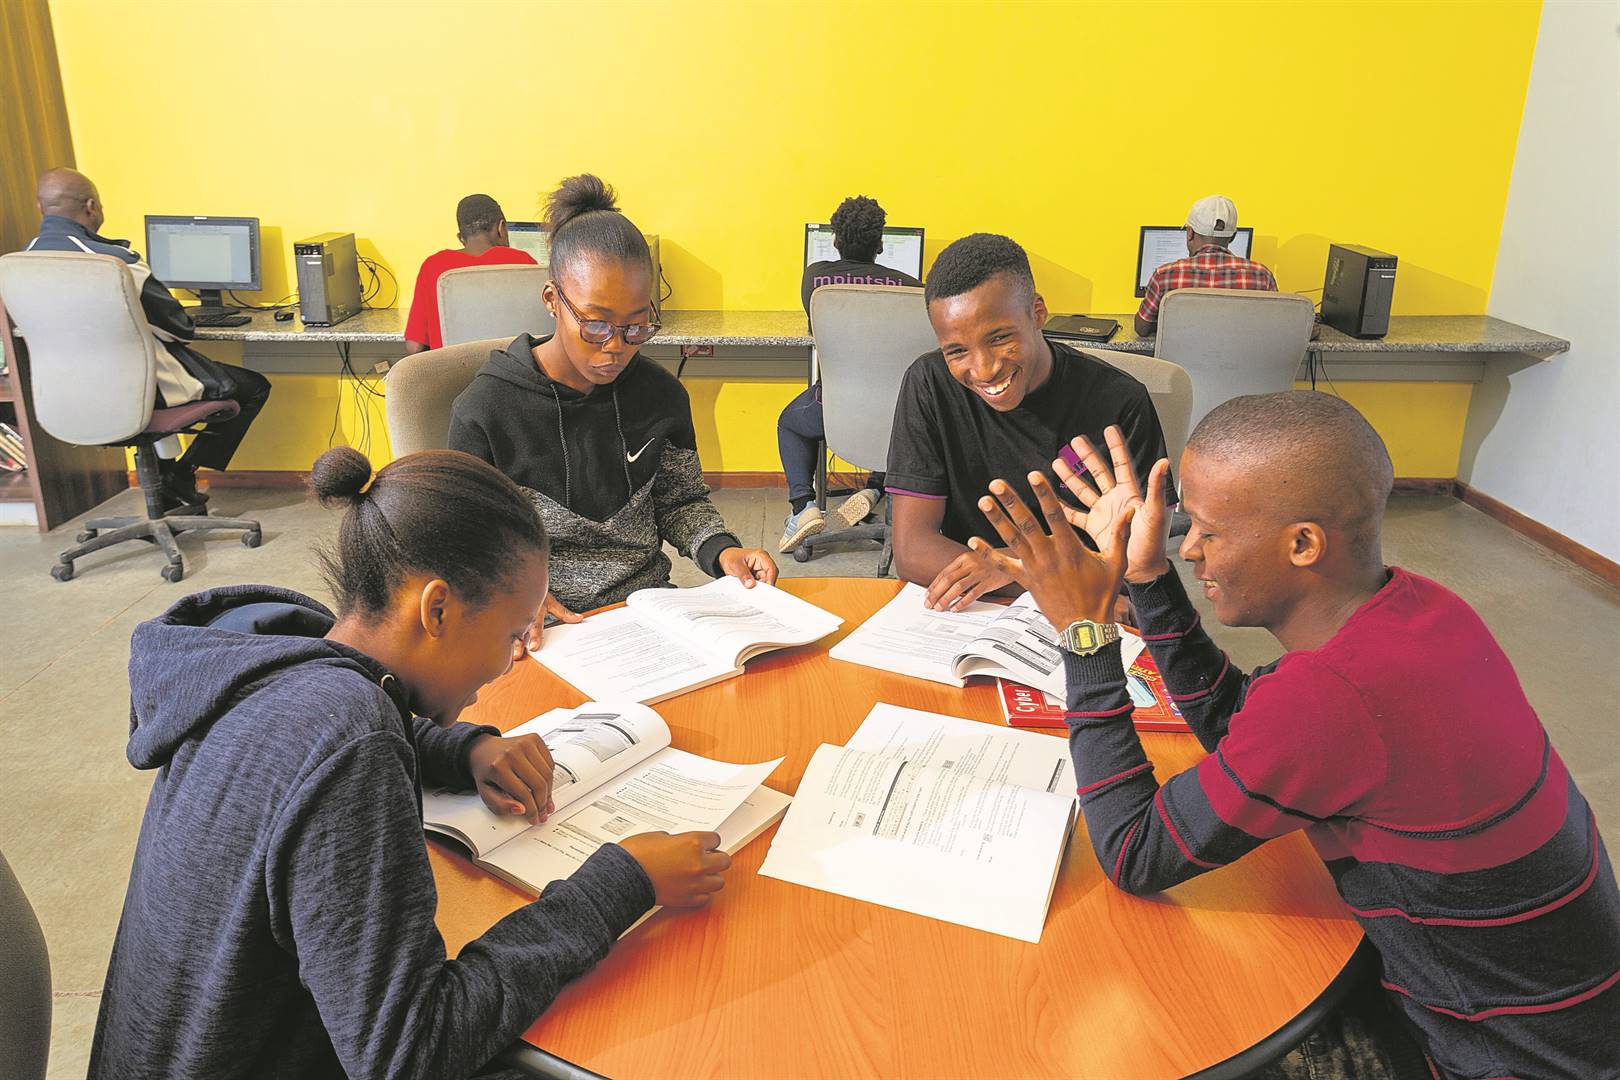 The loveLife Youth Centre in KwaNobuhle offers from counselling services, basic computer skills training to after-school educational support and many other programmes.                  